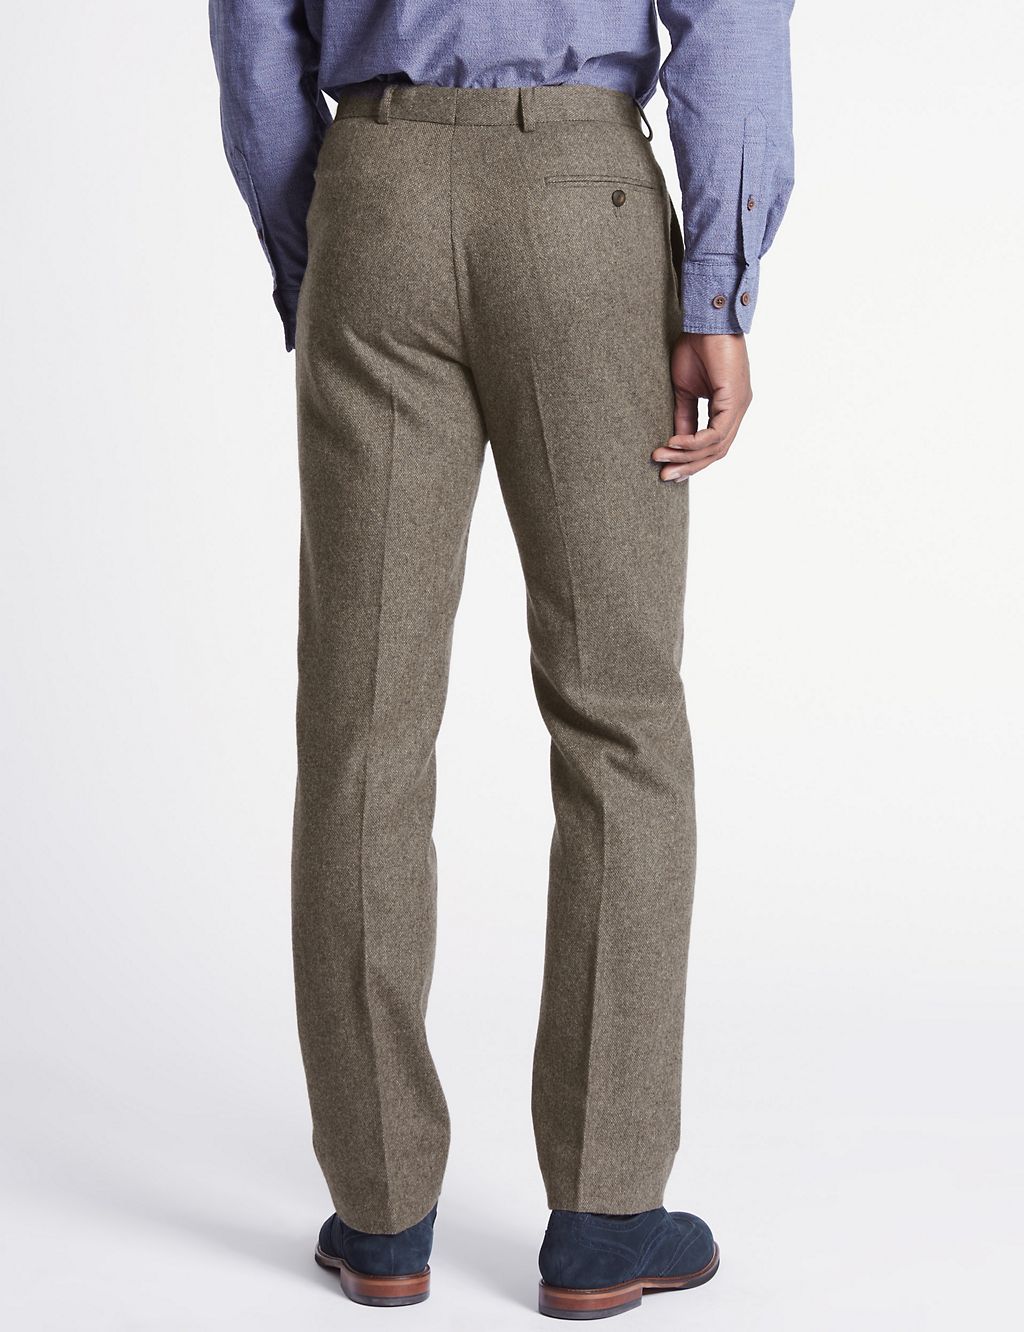 Wool Blend Trouser with Italian Fabric 4 of 6